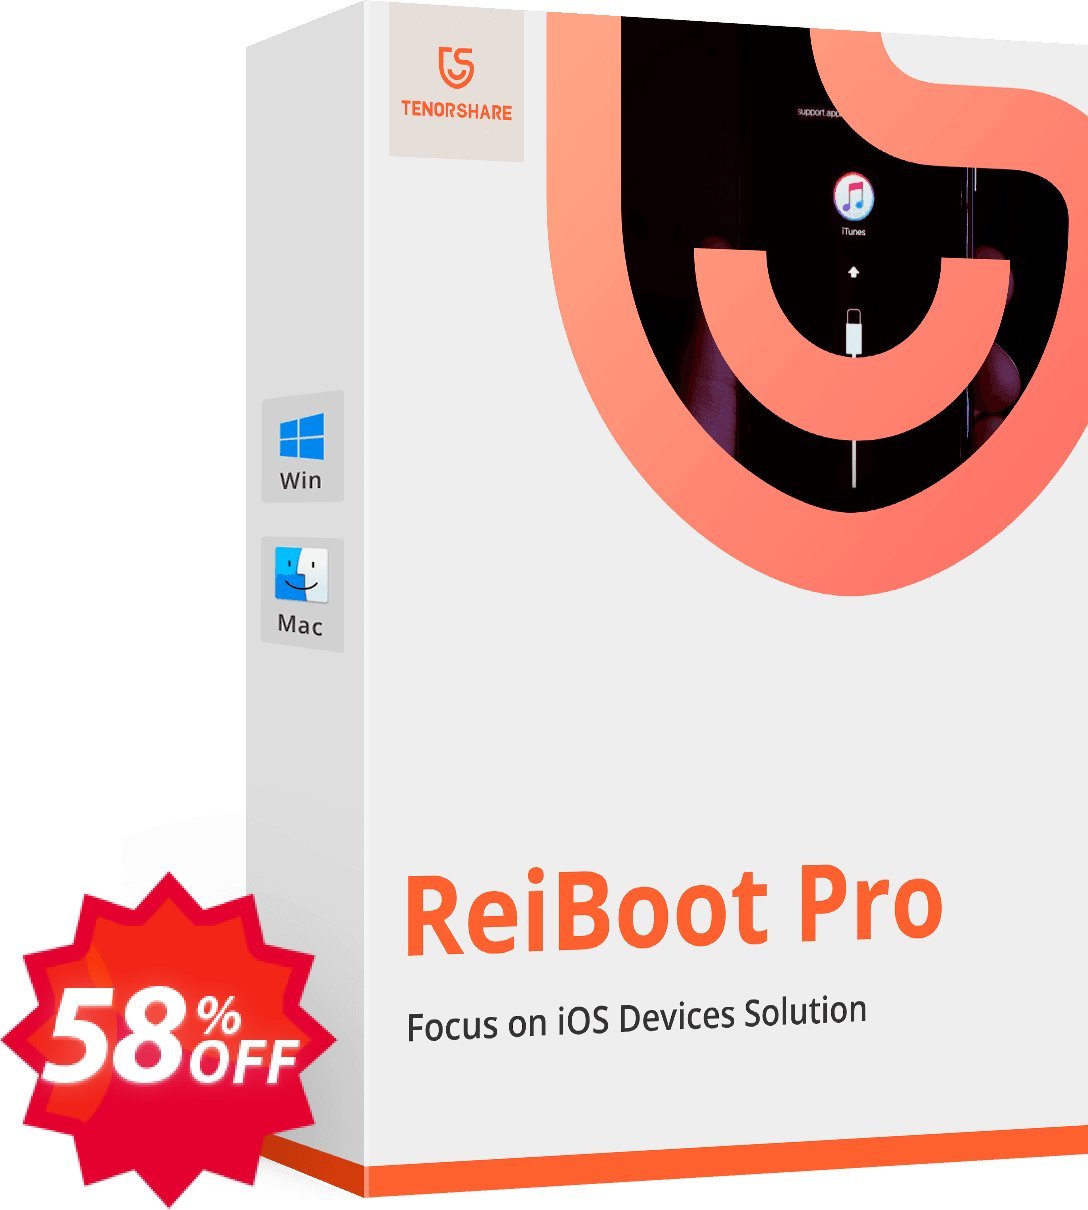 Tenorshare ReiBoot Pro, Unlimited Plan  Coupon code 58% discount 